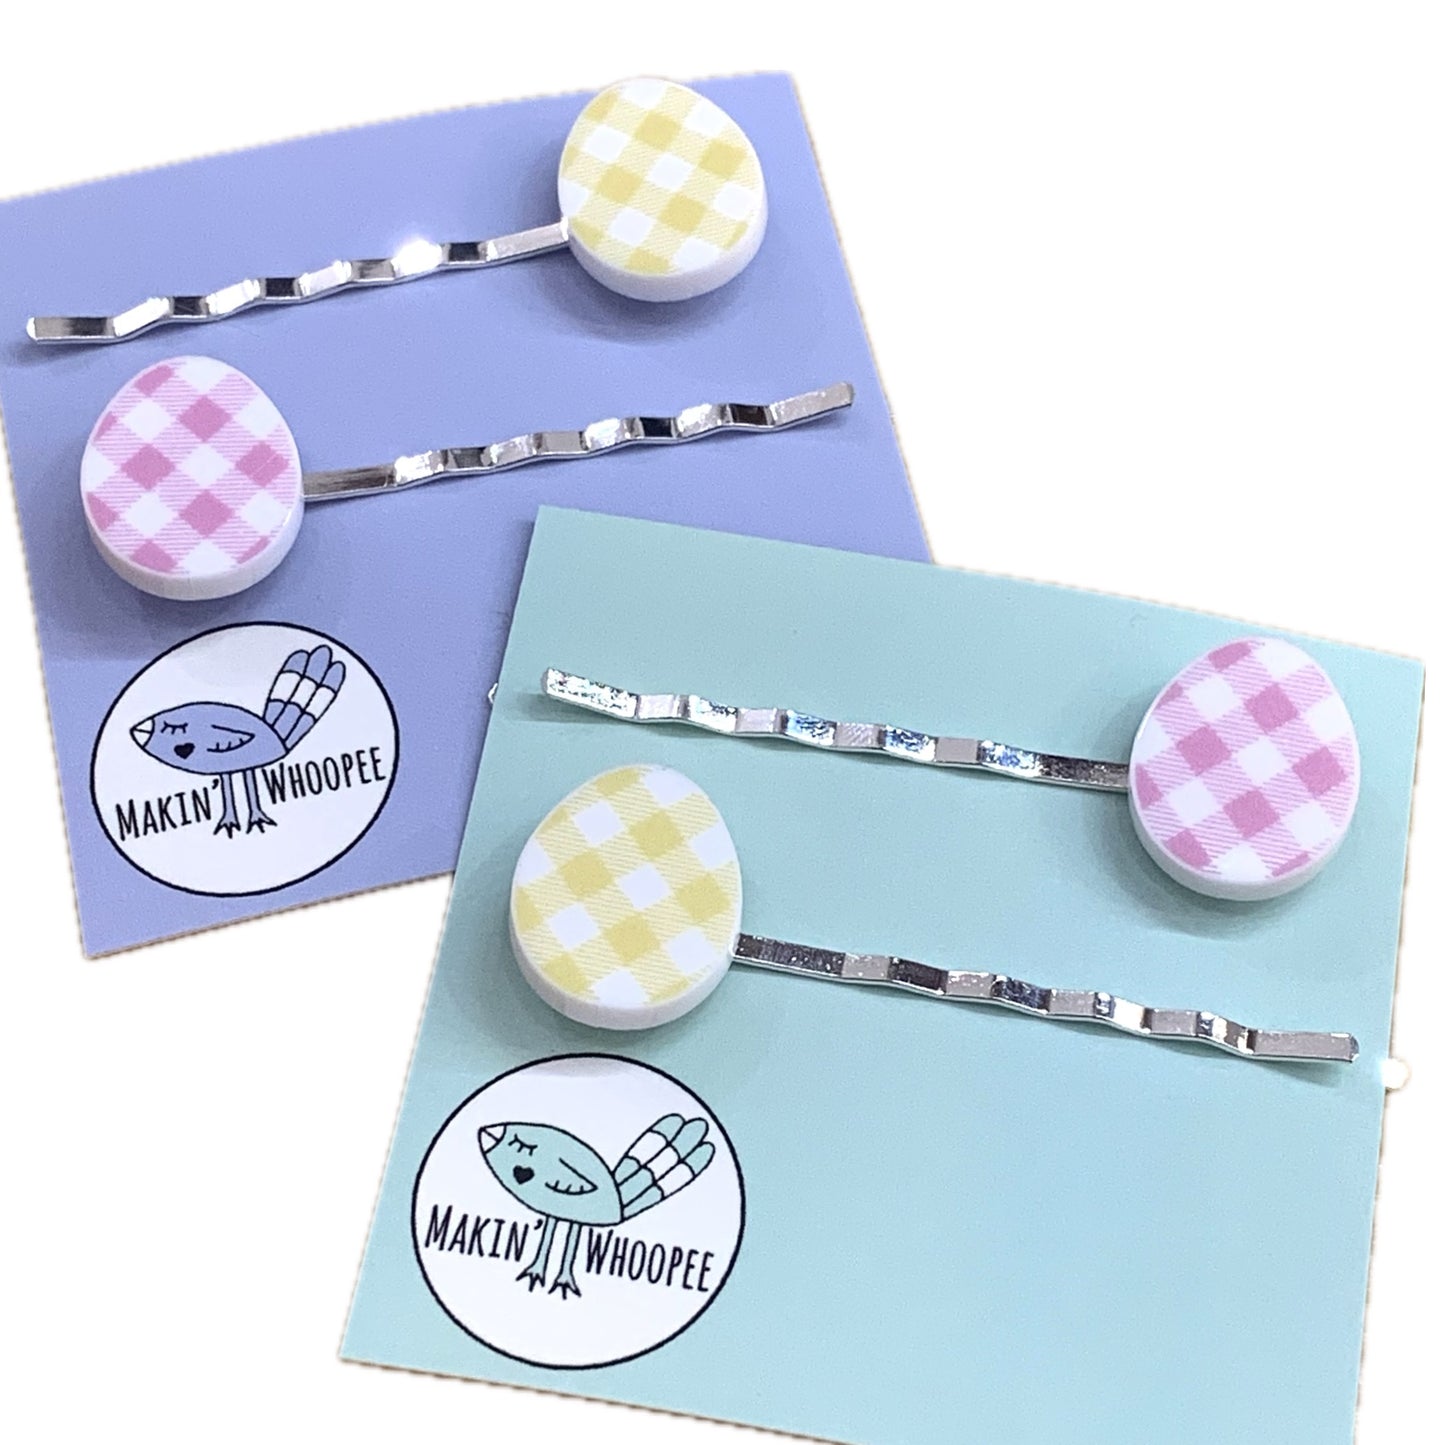 MAKIN' WHOOPEE EASTER HAIR CLIPS - YELLOW & PINK GINGHAM